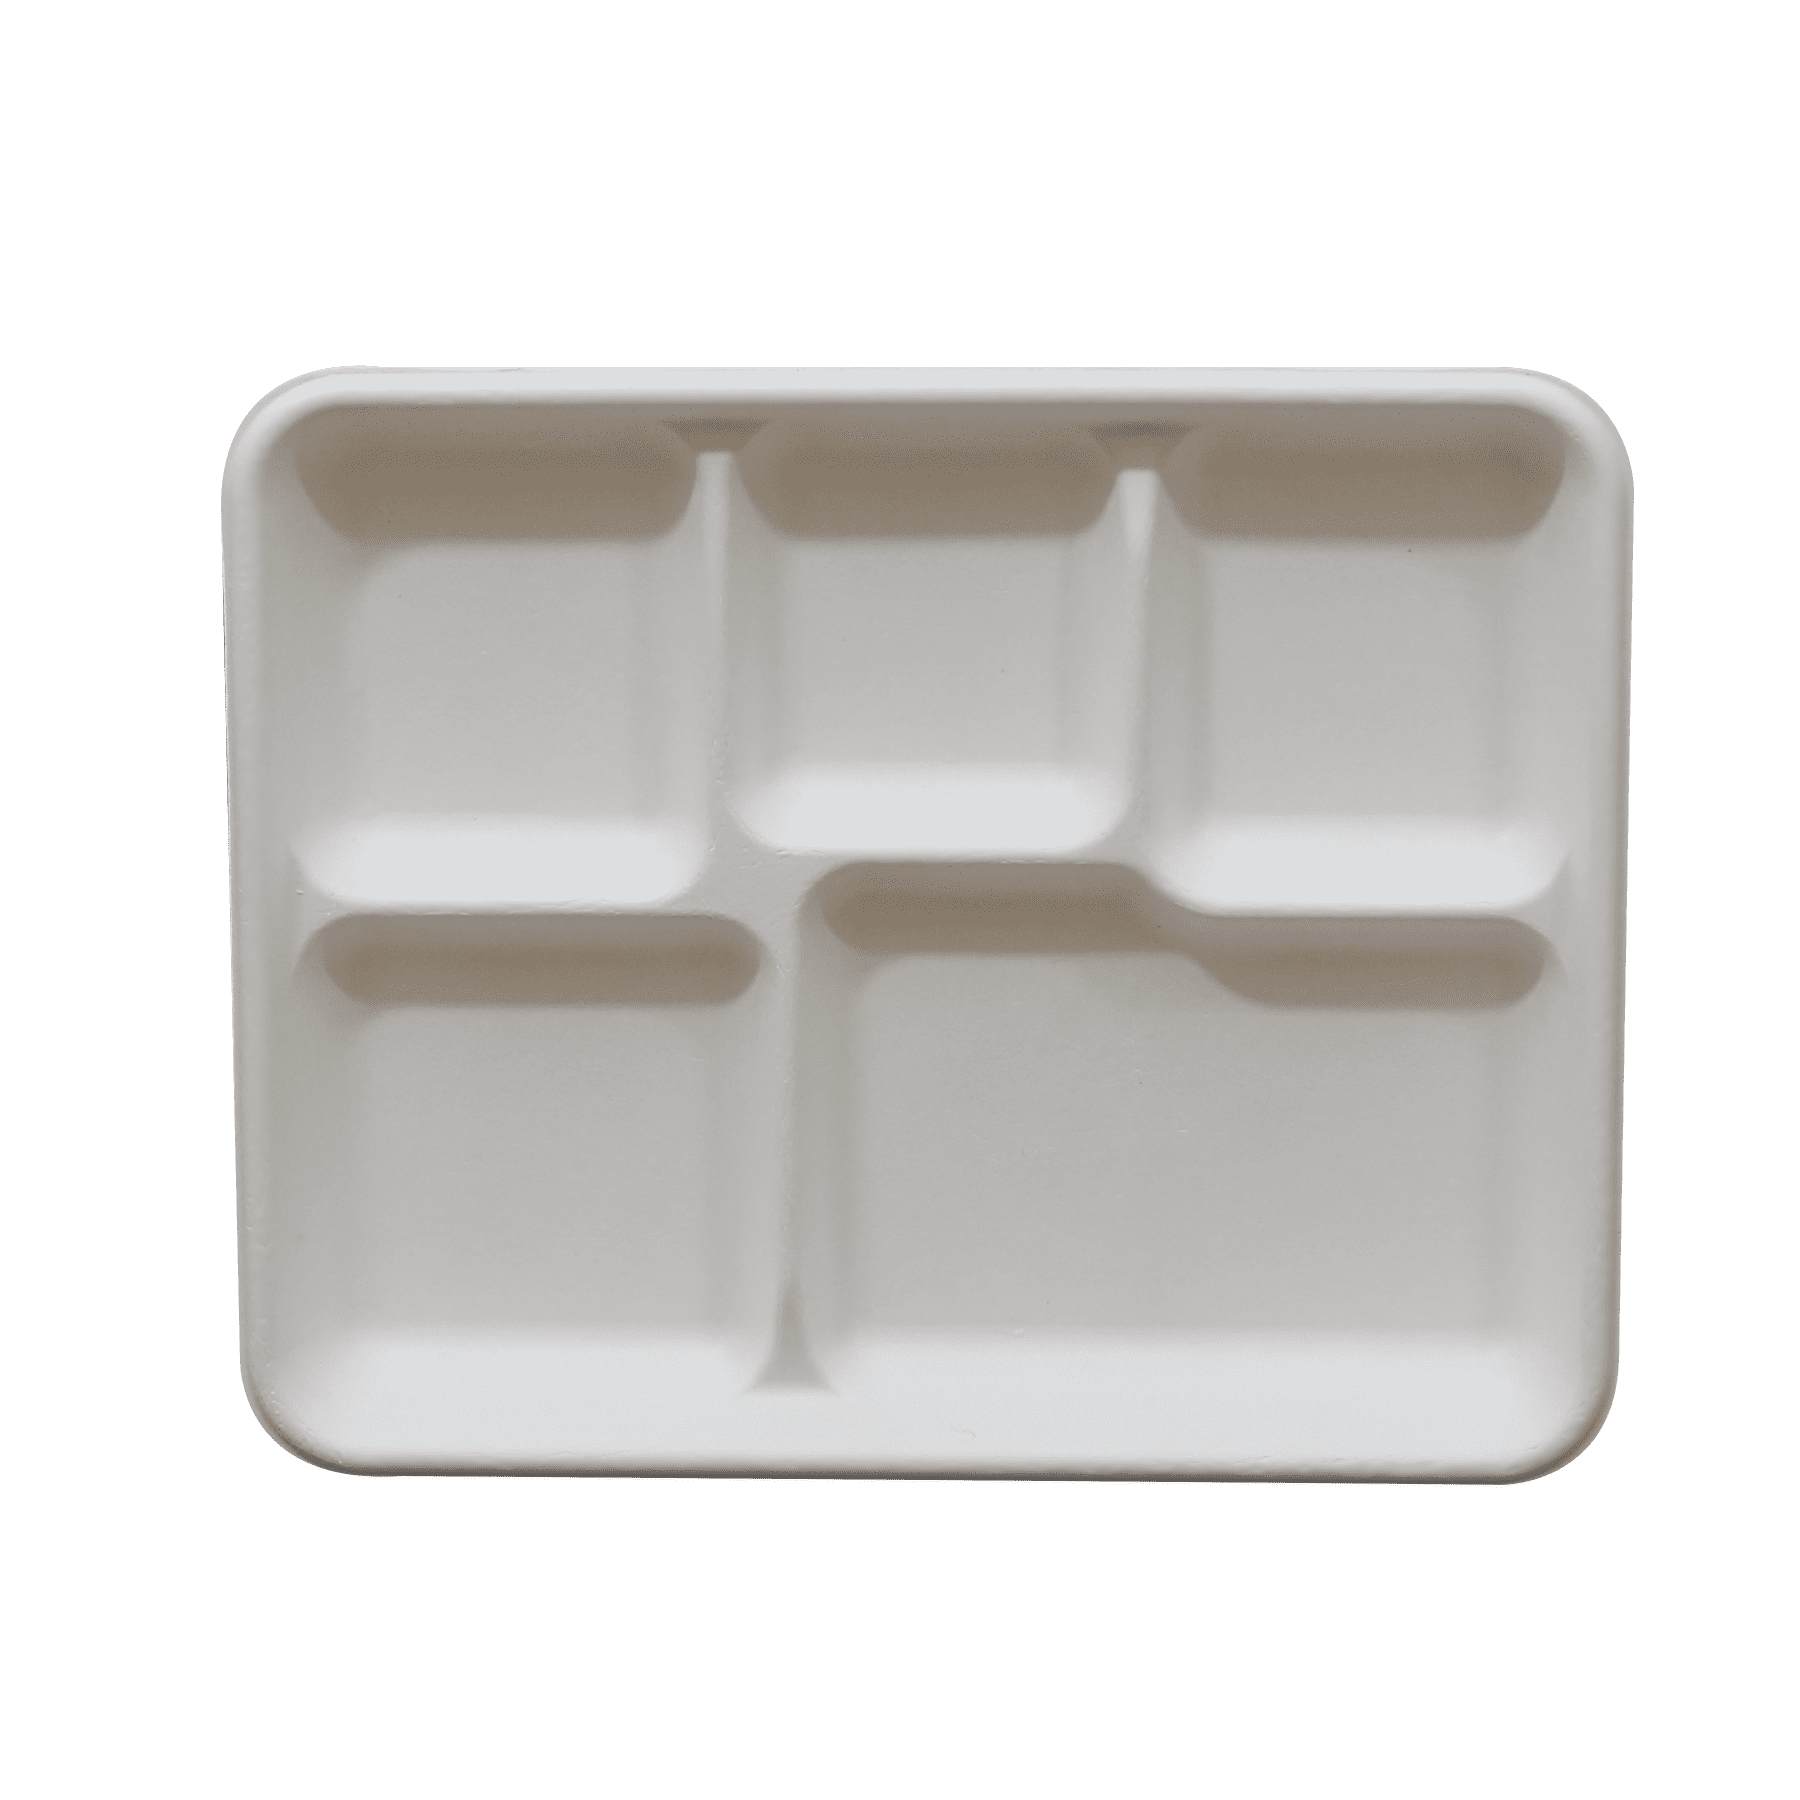 Do you have to grease disposable baking pans? – PaperMi